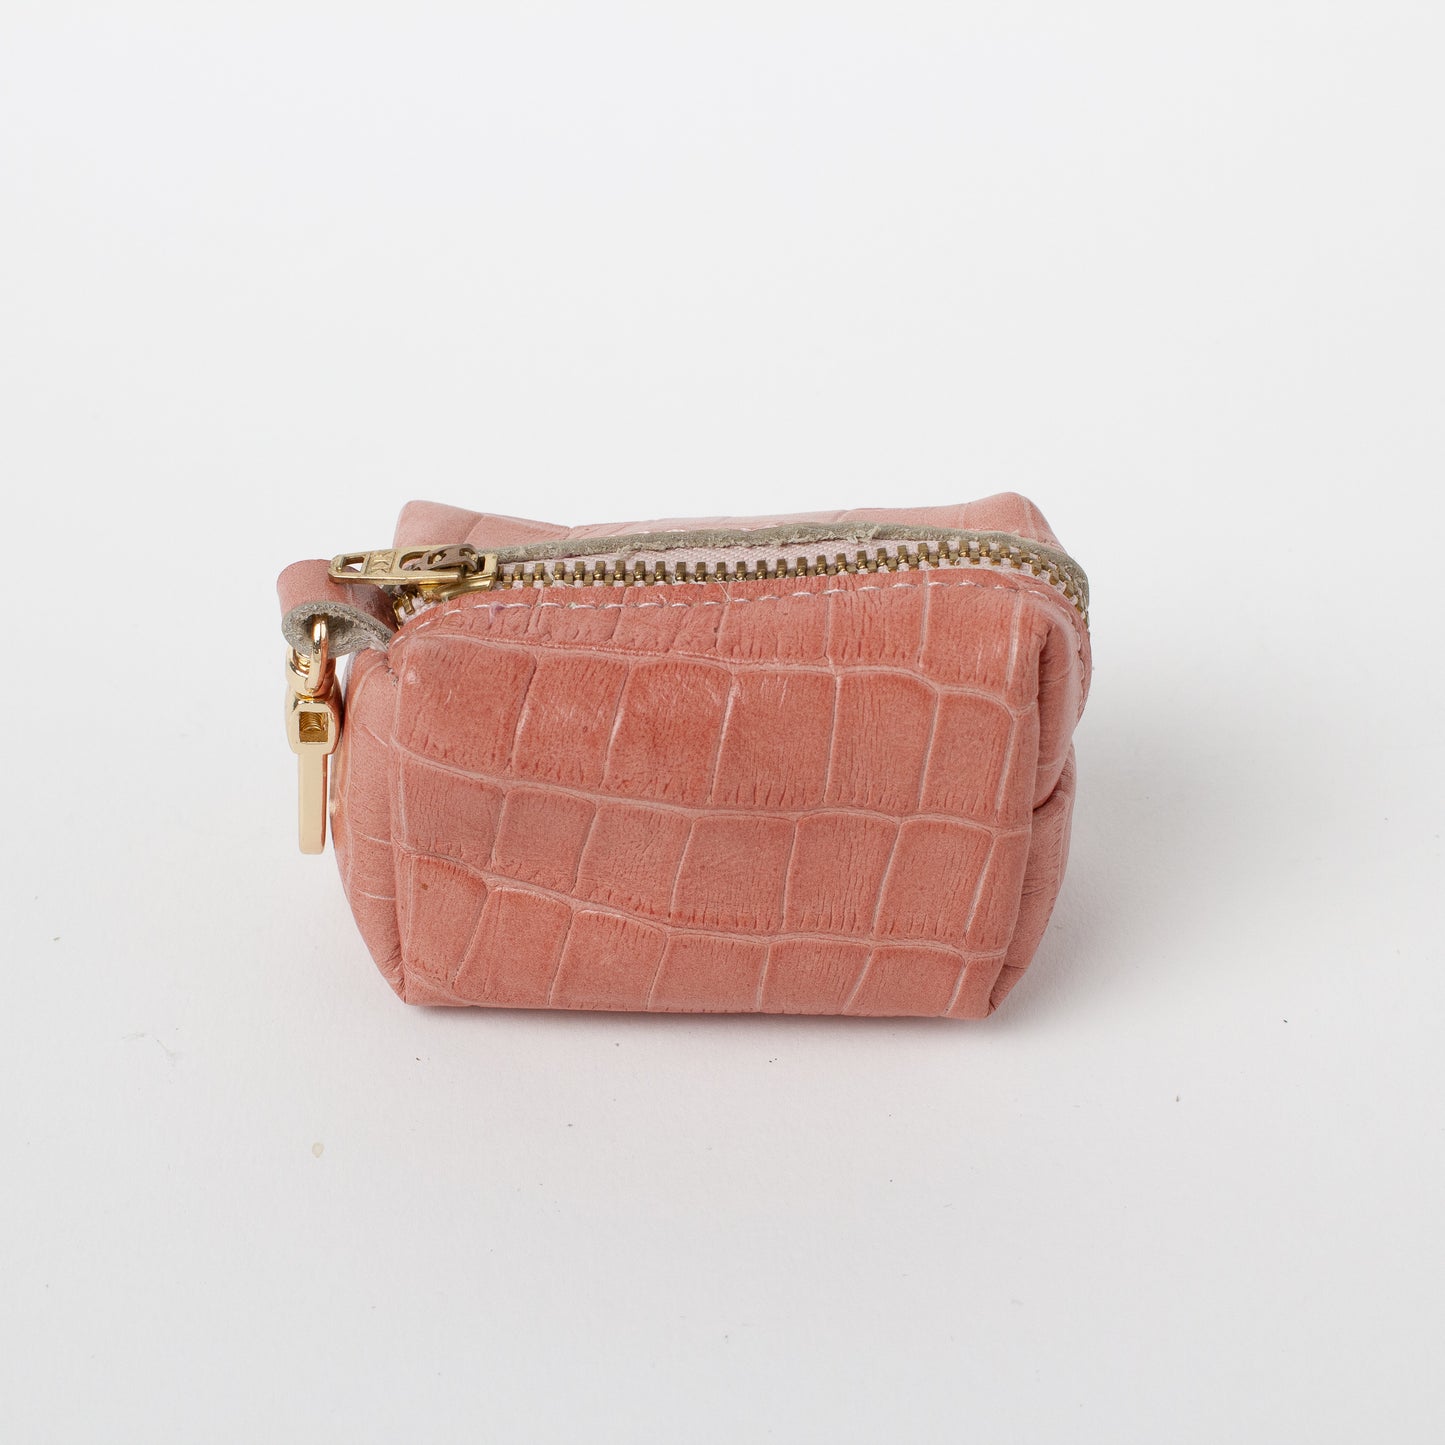 Willow Walks leather poo bag with croc effect in dusky pink